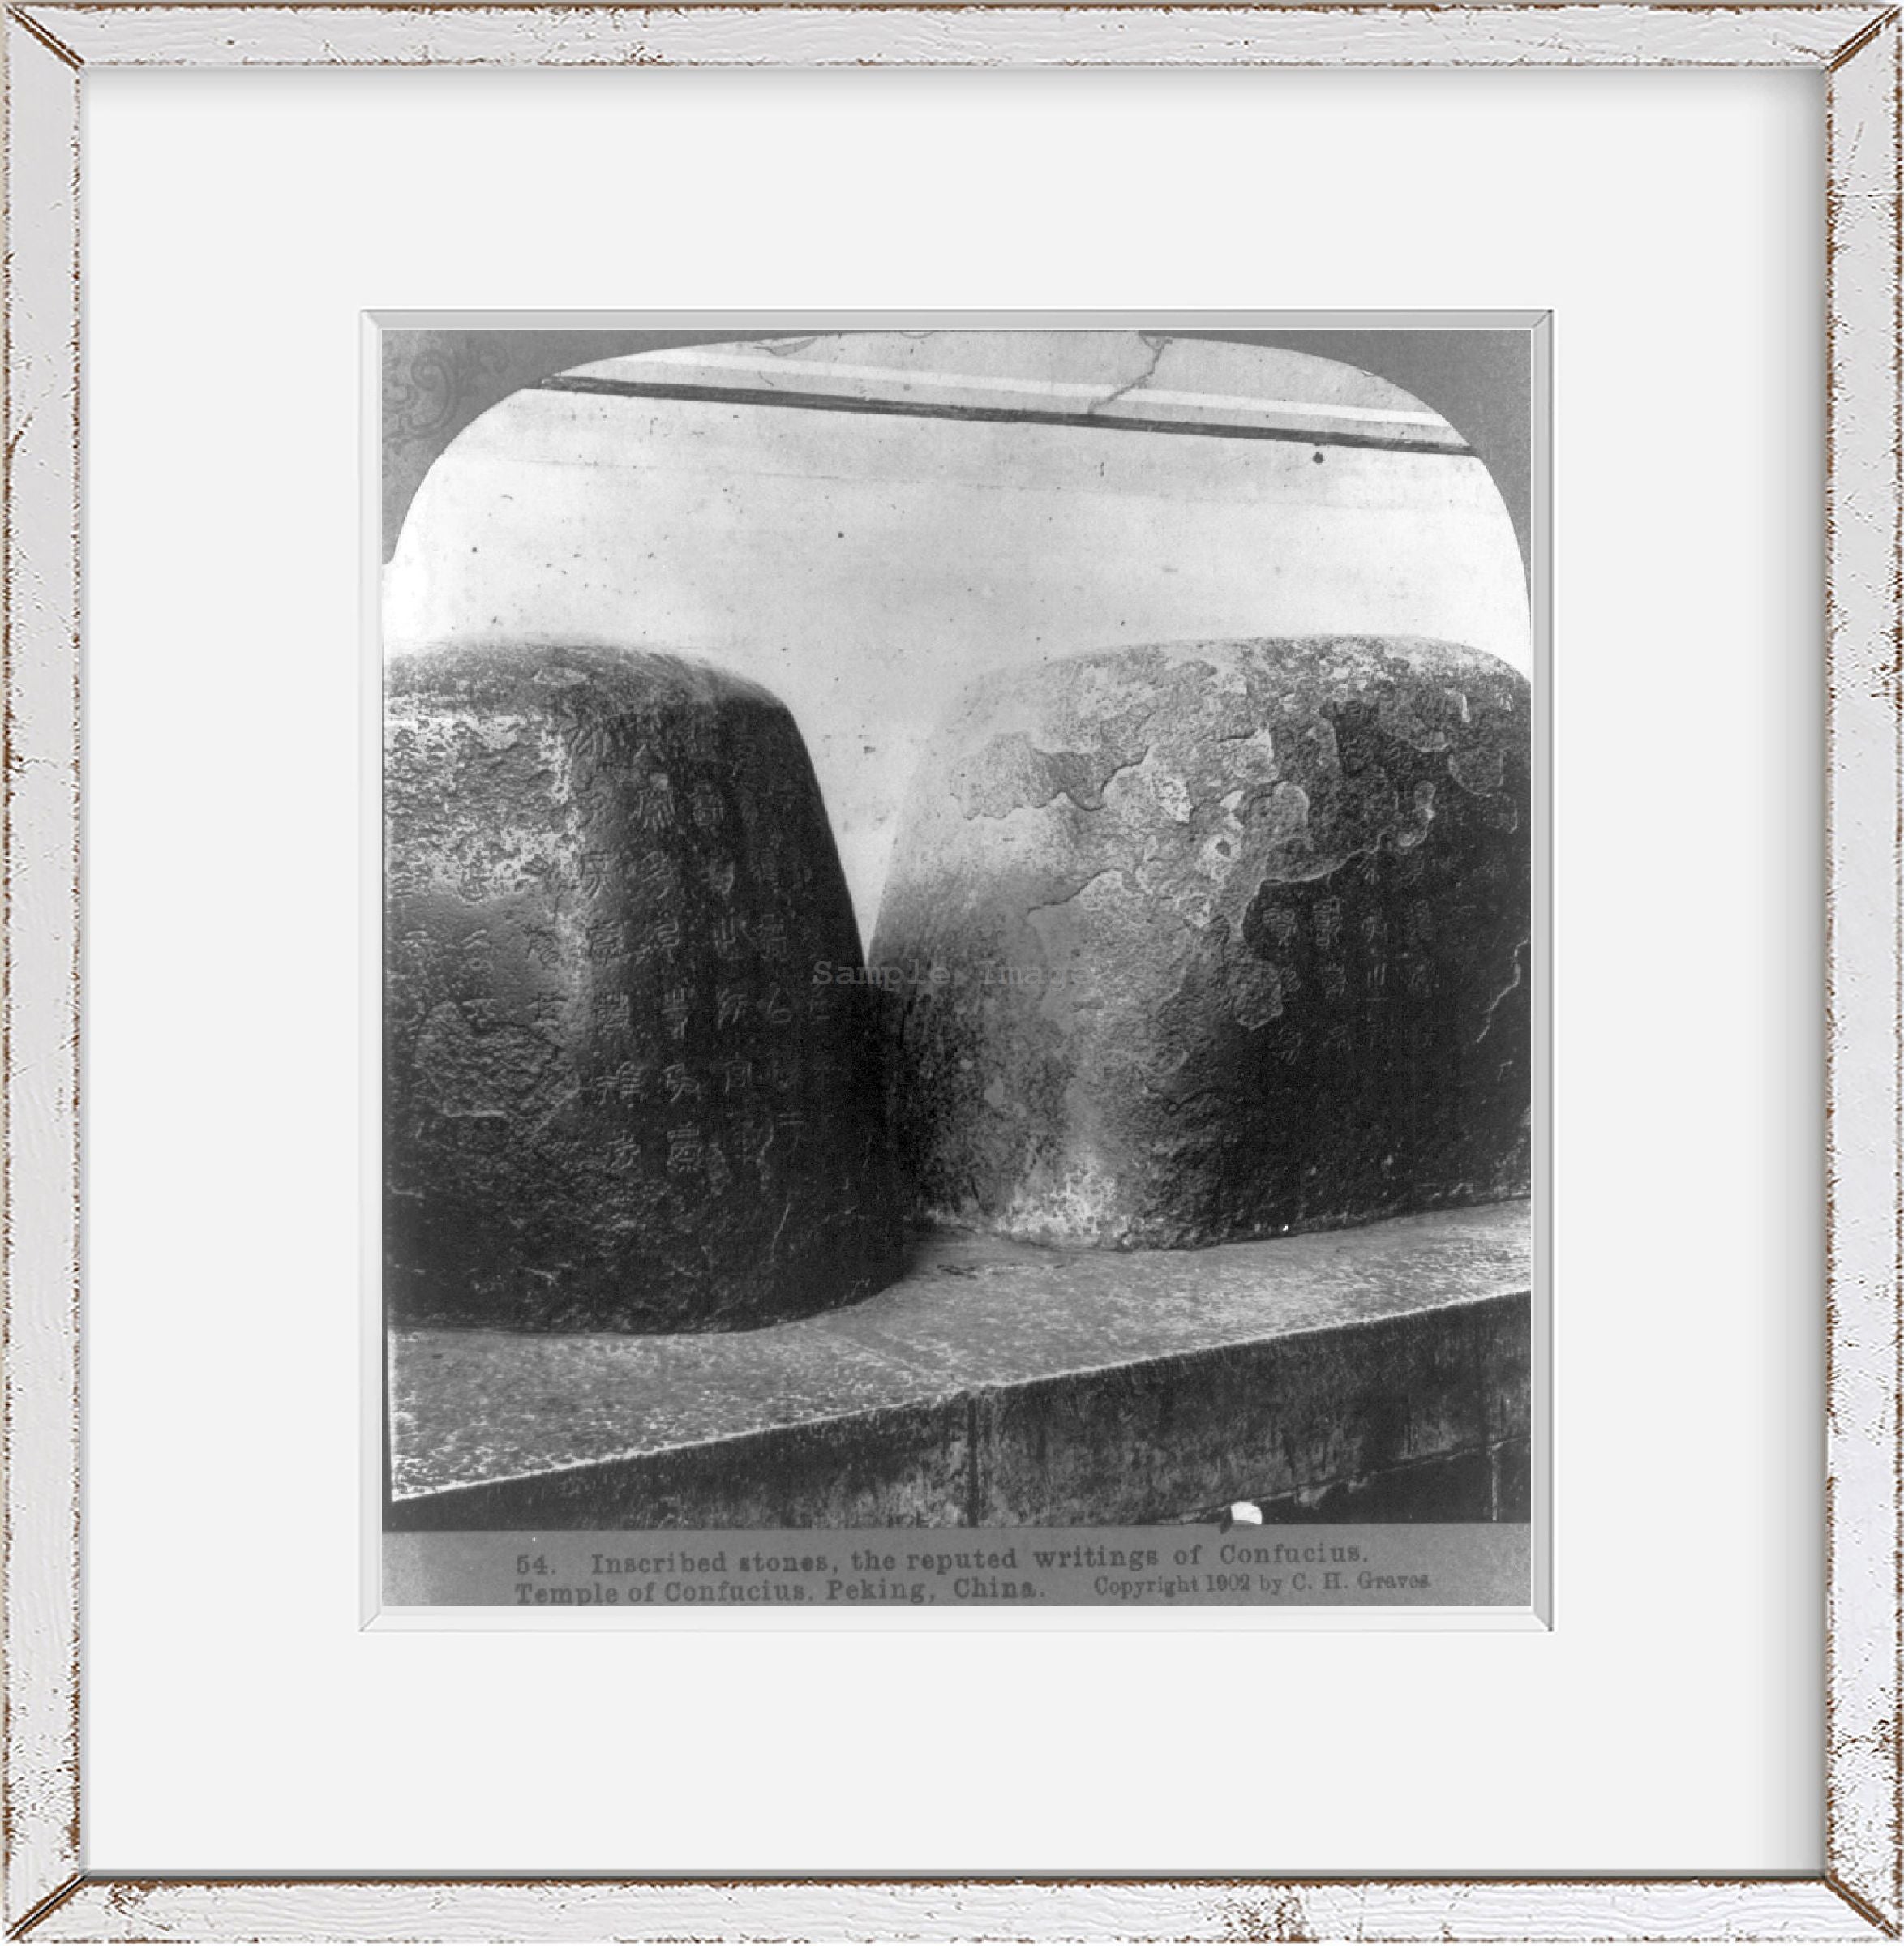 1902 Photo Inscribed stones, the reputed writings of Confucius. Temple of Confuc